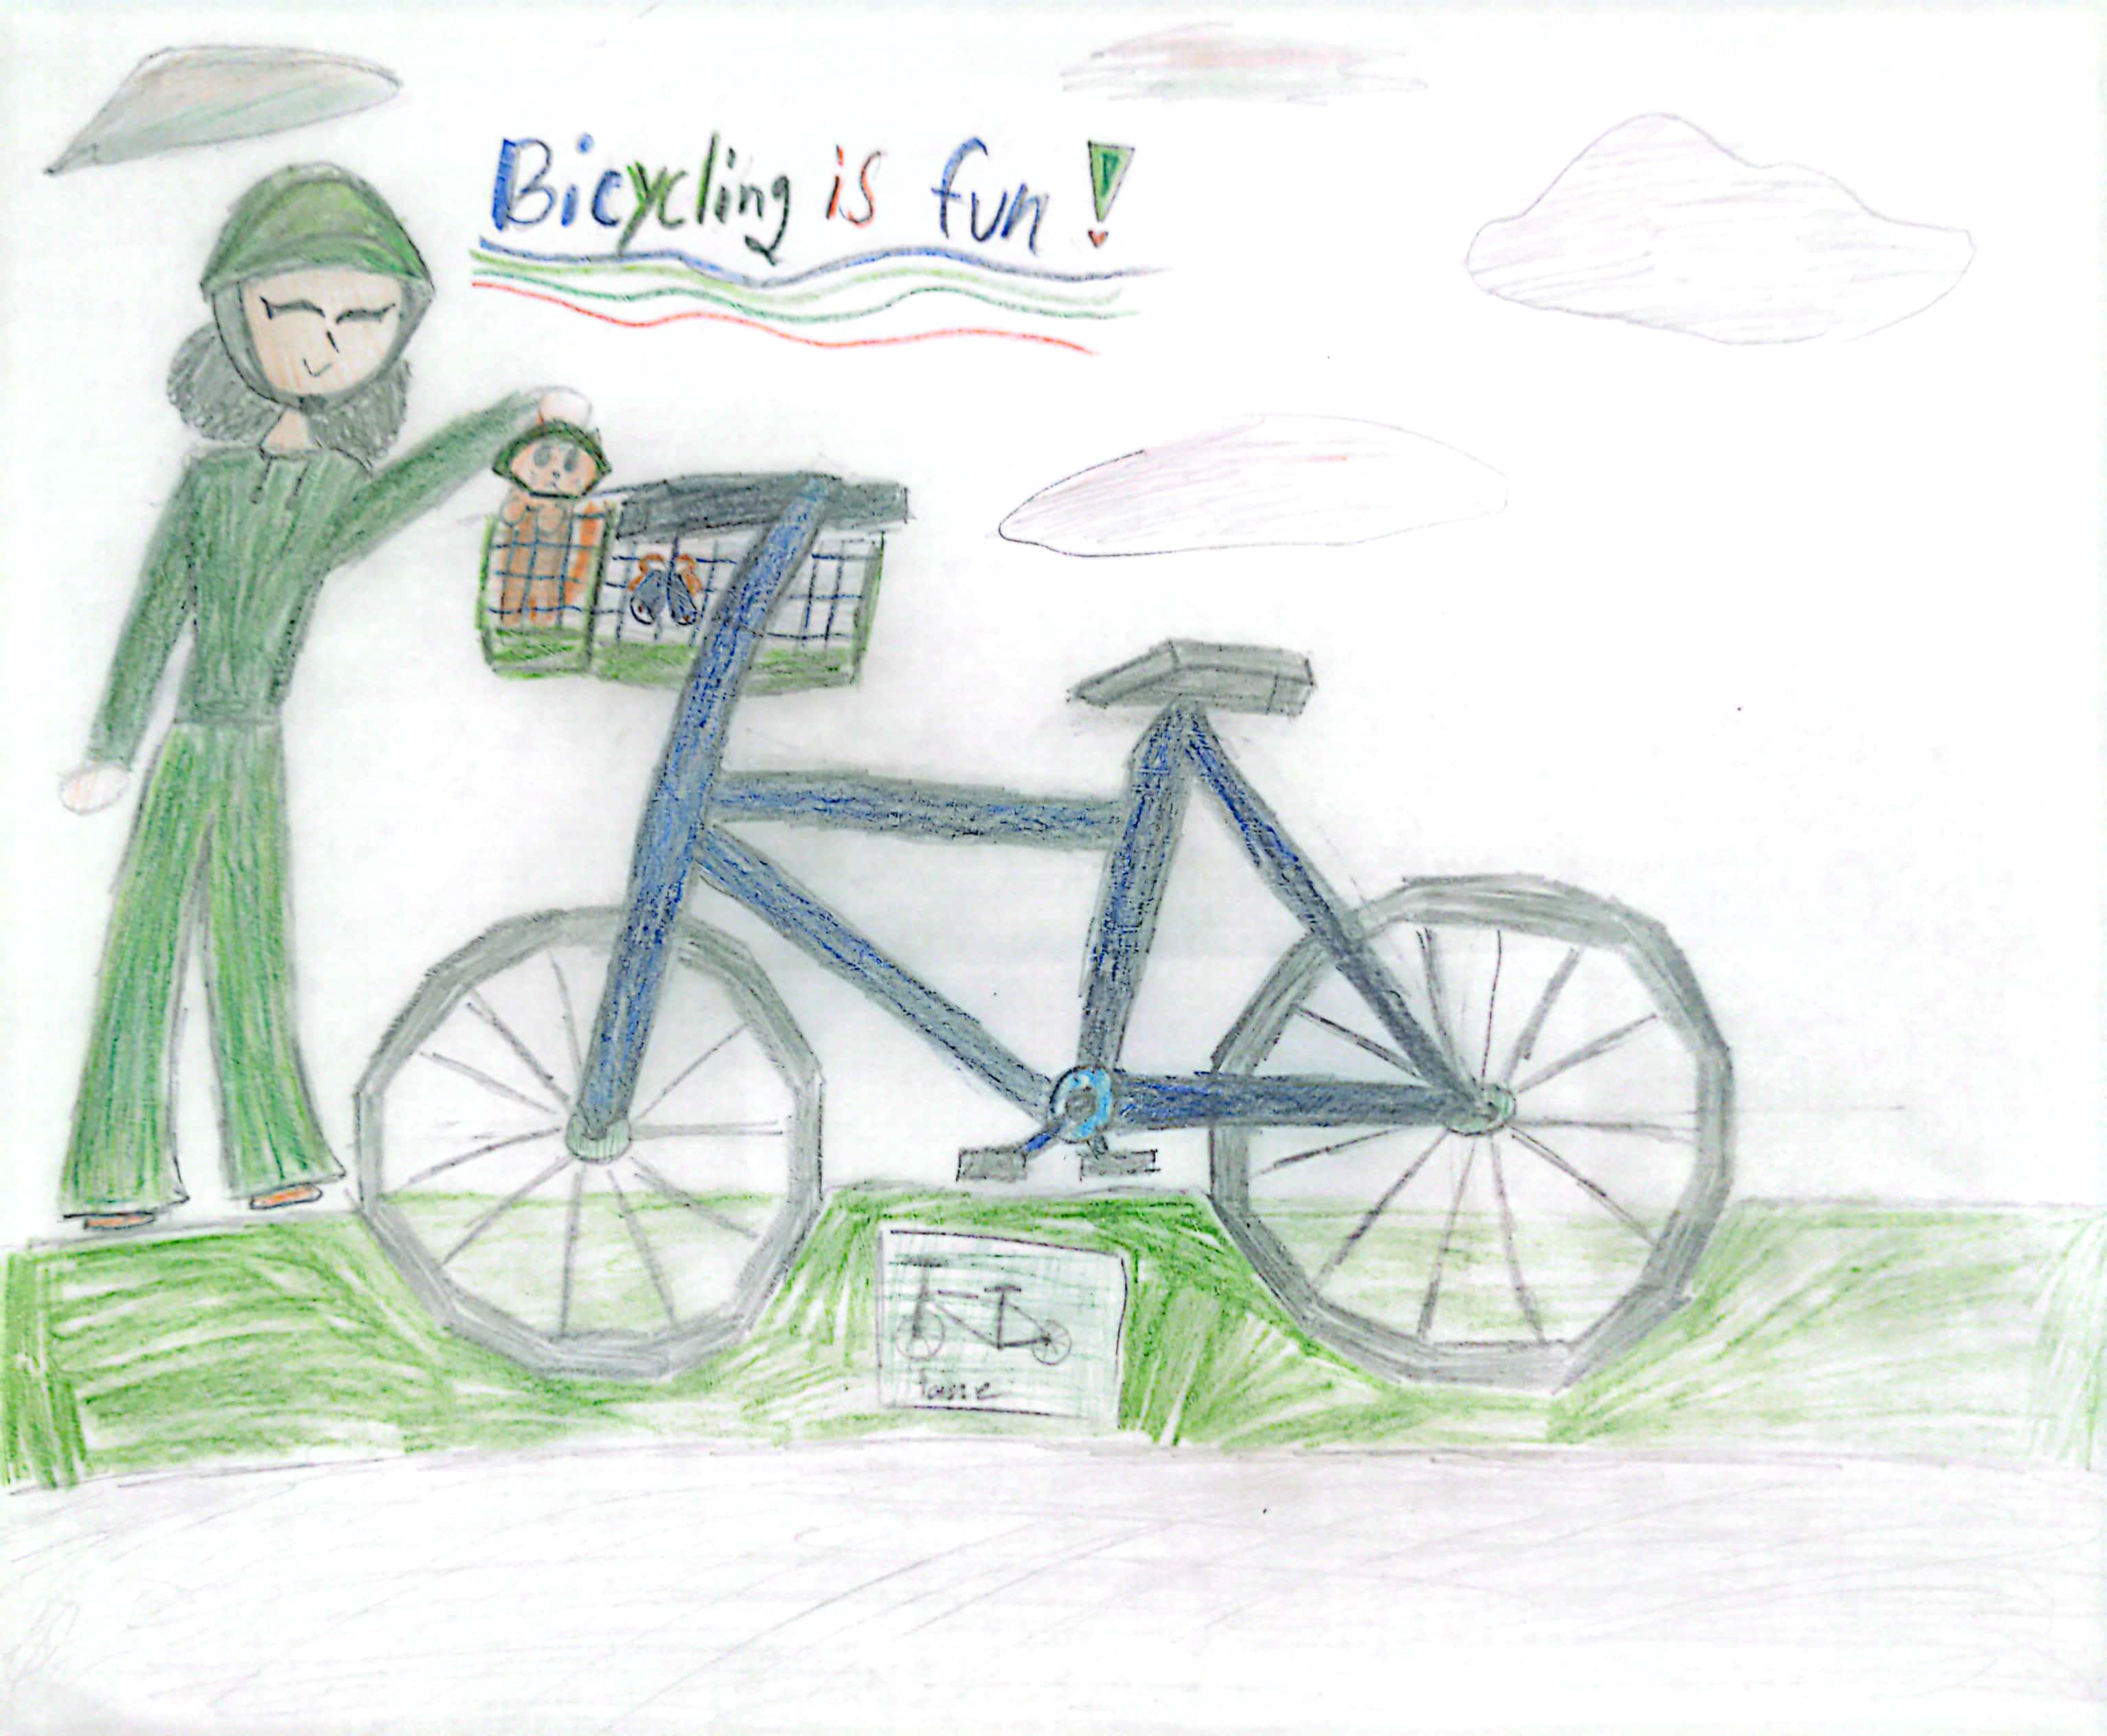 Student artwork showing a girl in green helmet and outfit standing next to her blue bike on the path. There are clouds in the sky and she is petting the kitten wearing a helmet and sitting in the bike basket.